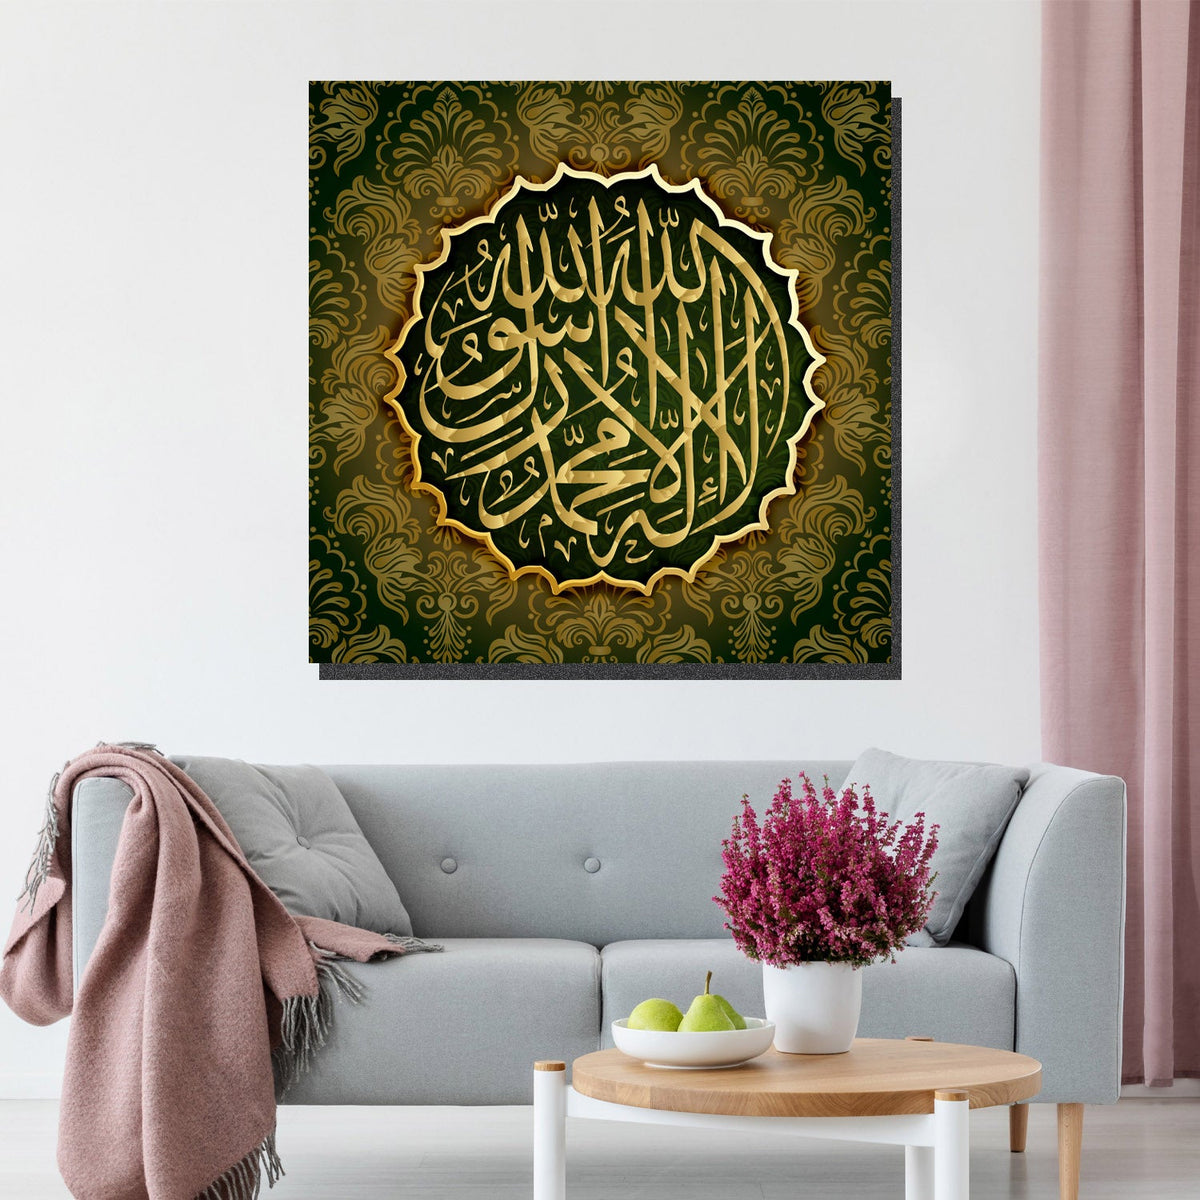 https://cdn.shopify.com/s/files/1/0387/9986/8044/products/BlessedJumahCanvasArtprintStretched-3.jpg